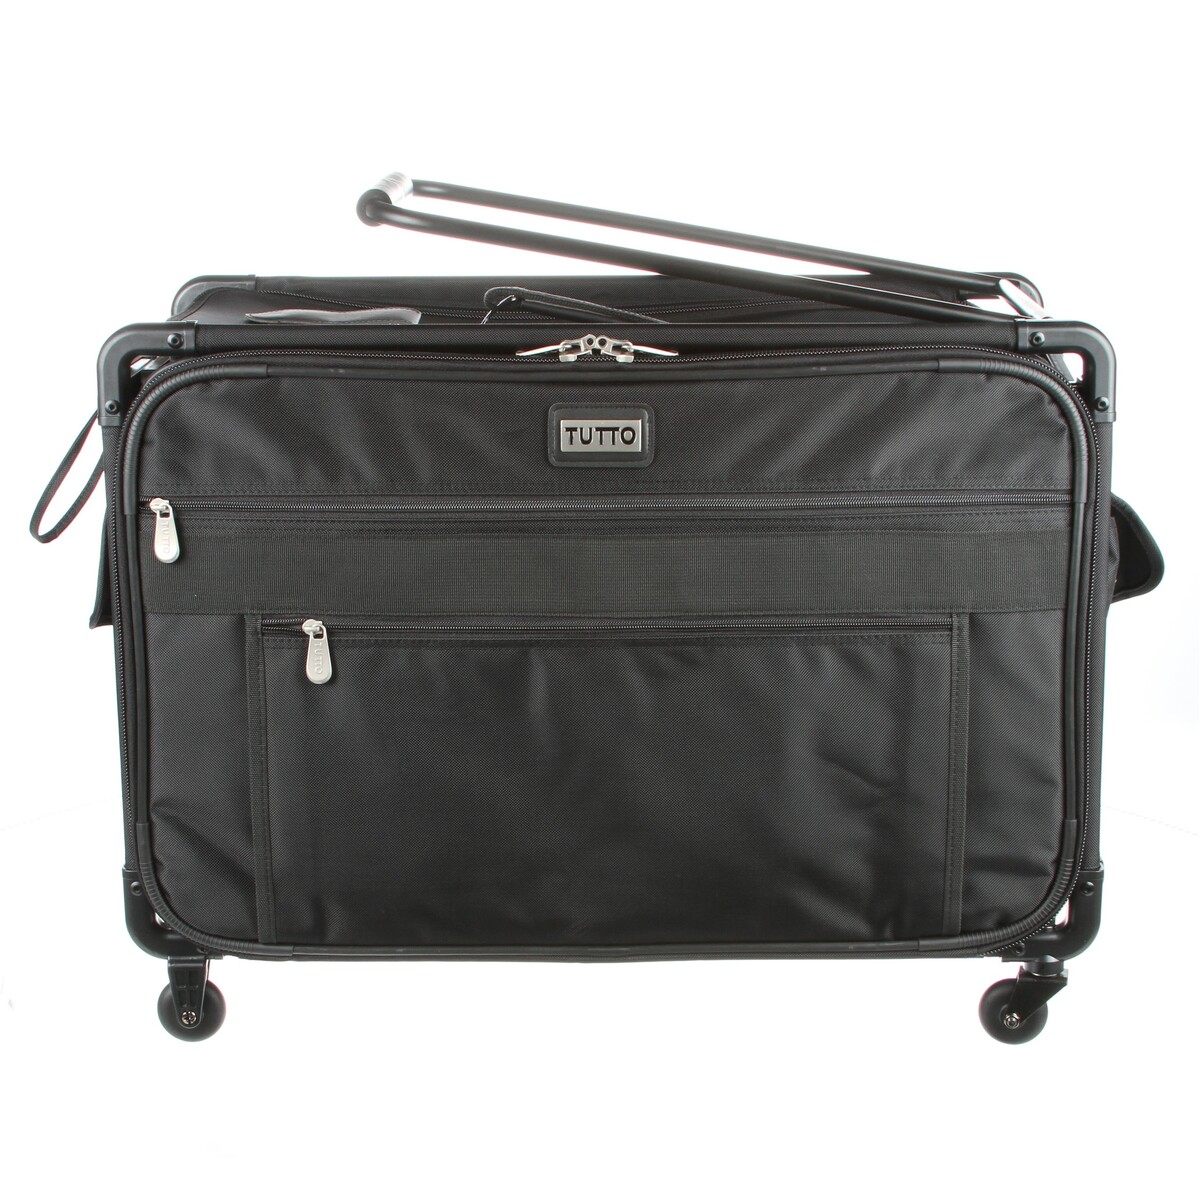 Tutto Extra Large Sewing Machine Bag On Wheels - Black